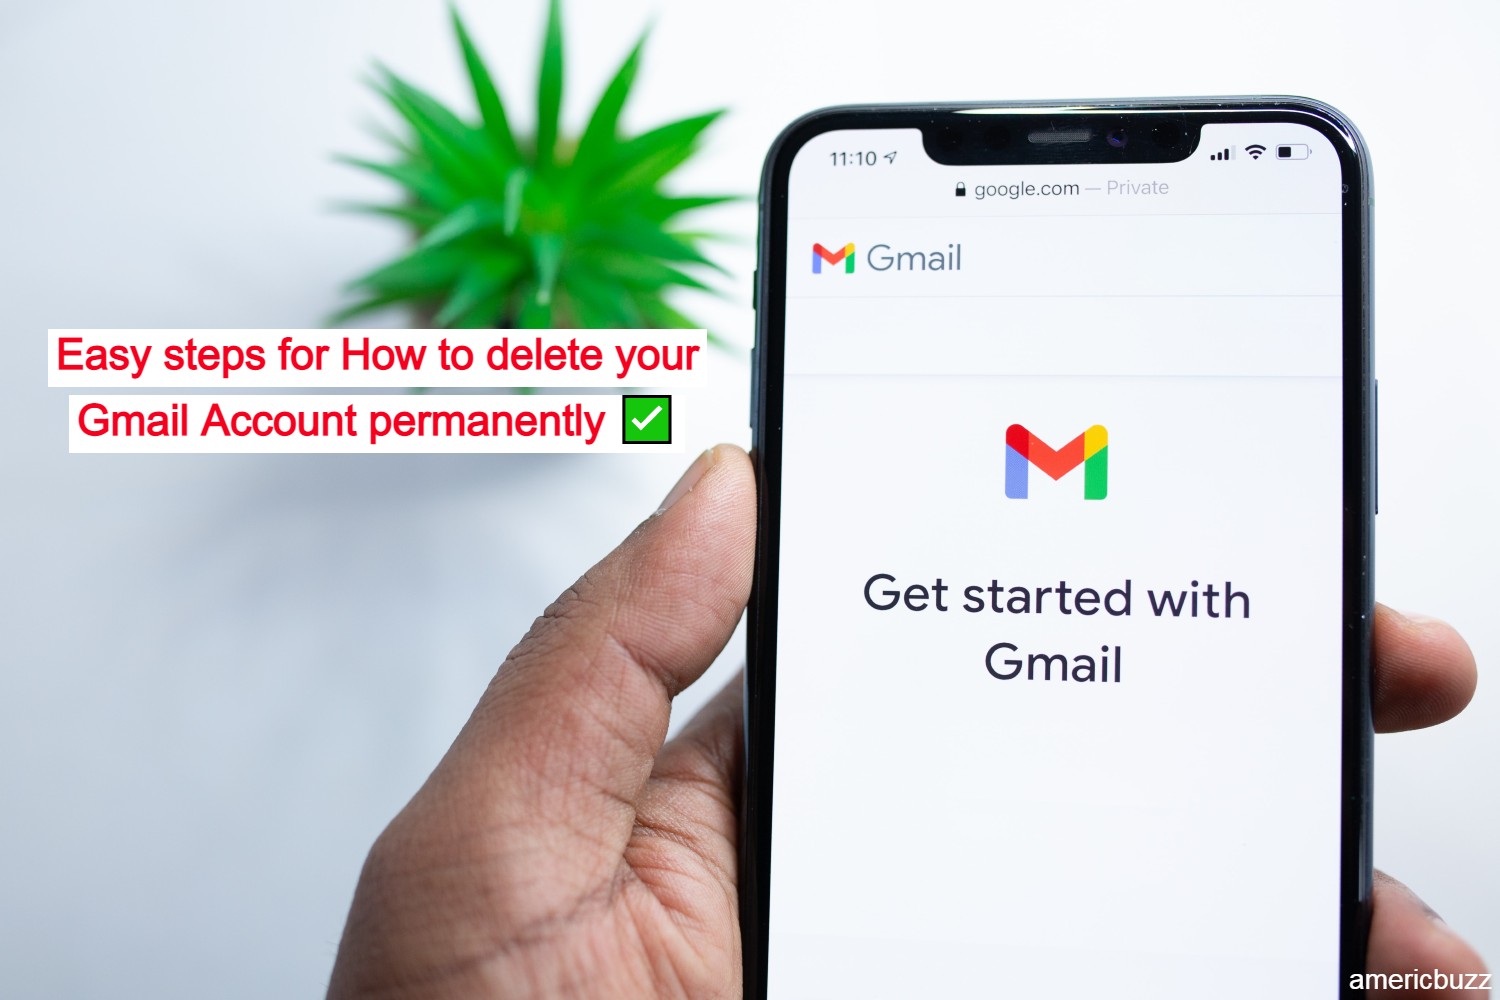 Easy steps for How to delete your Gmail Account permanently